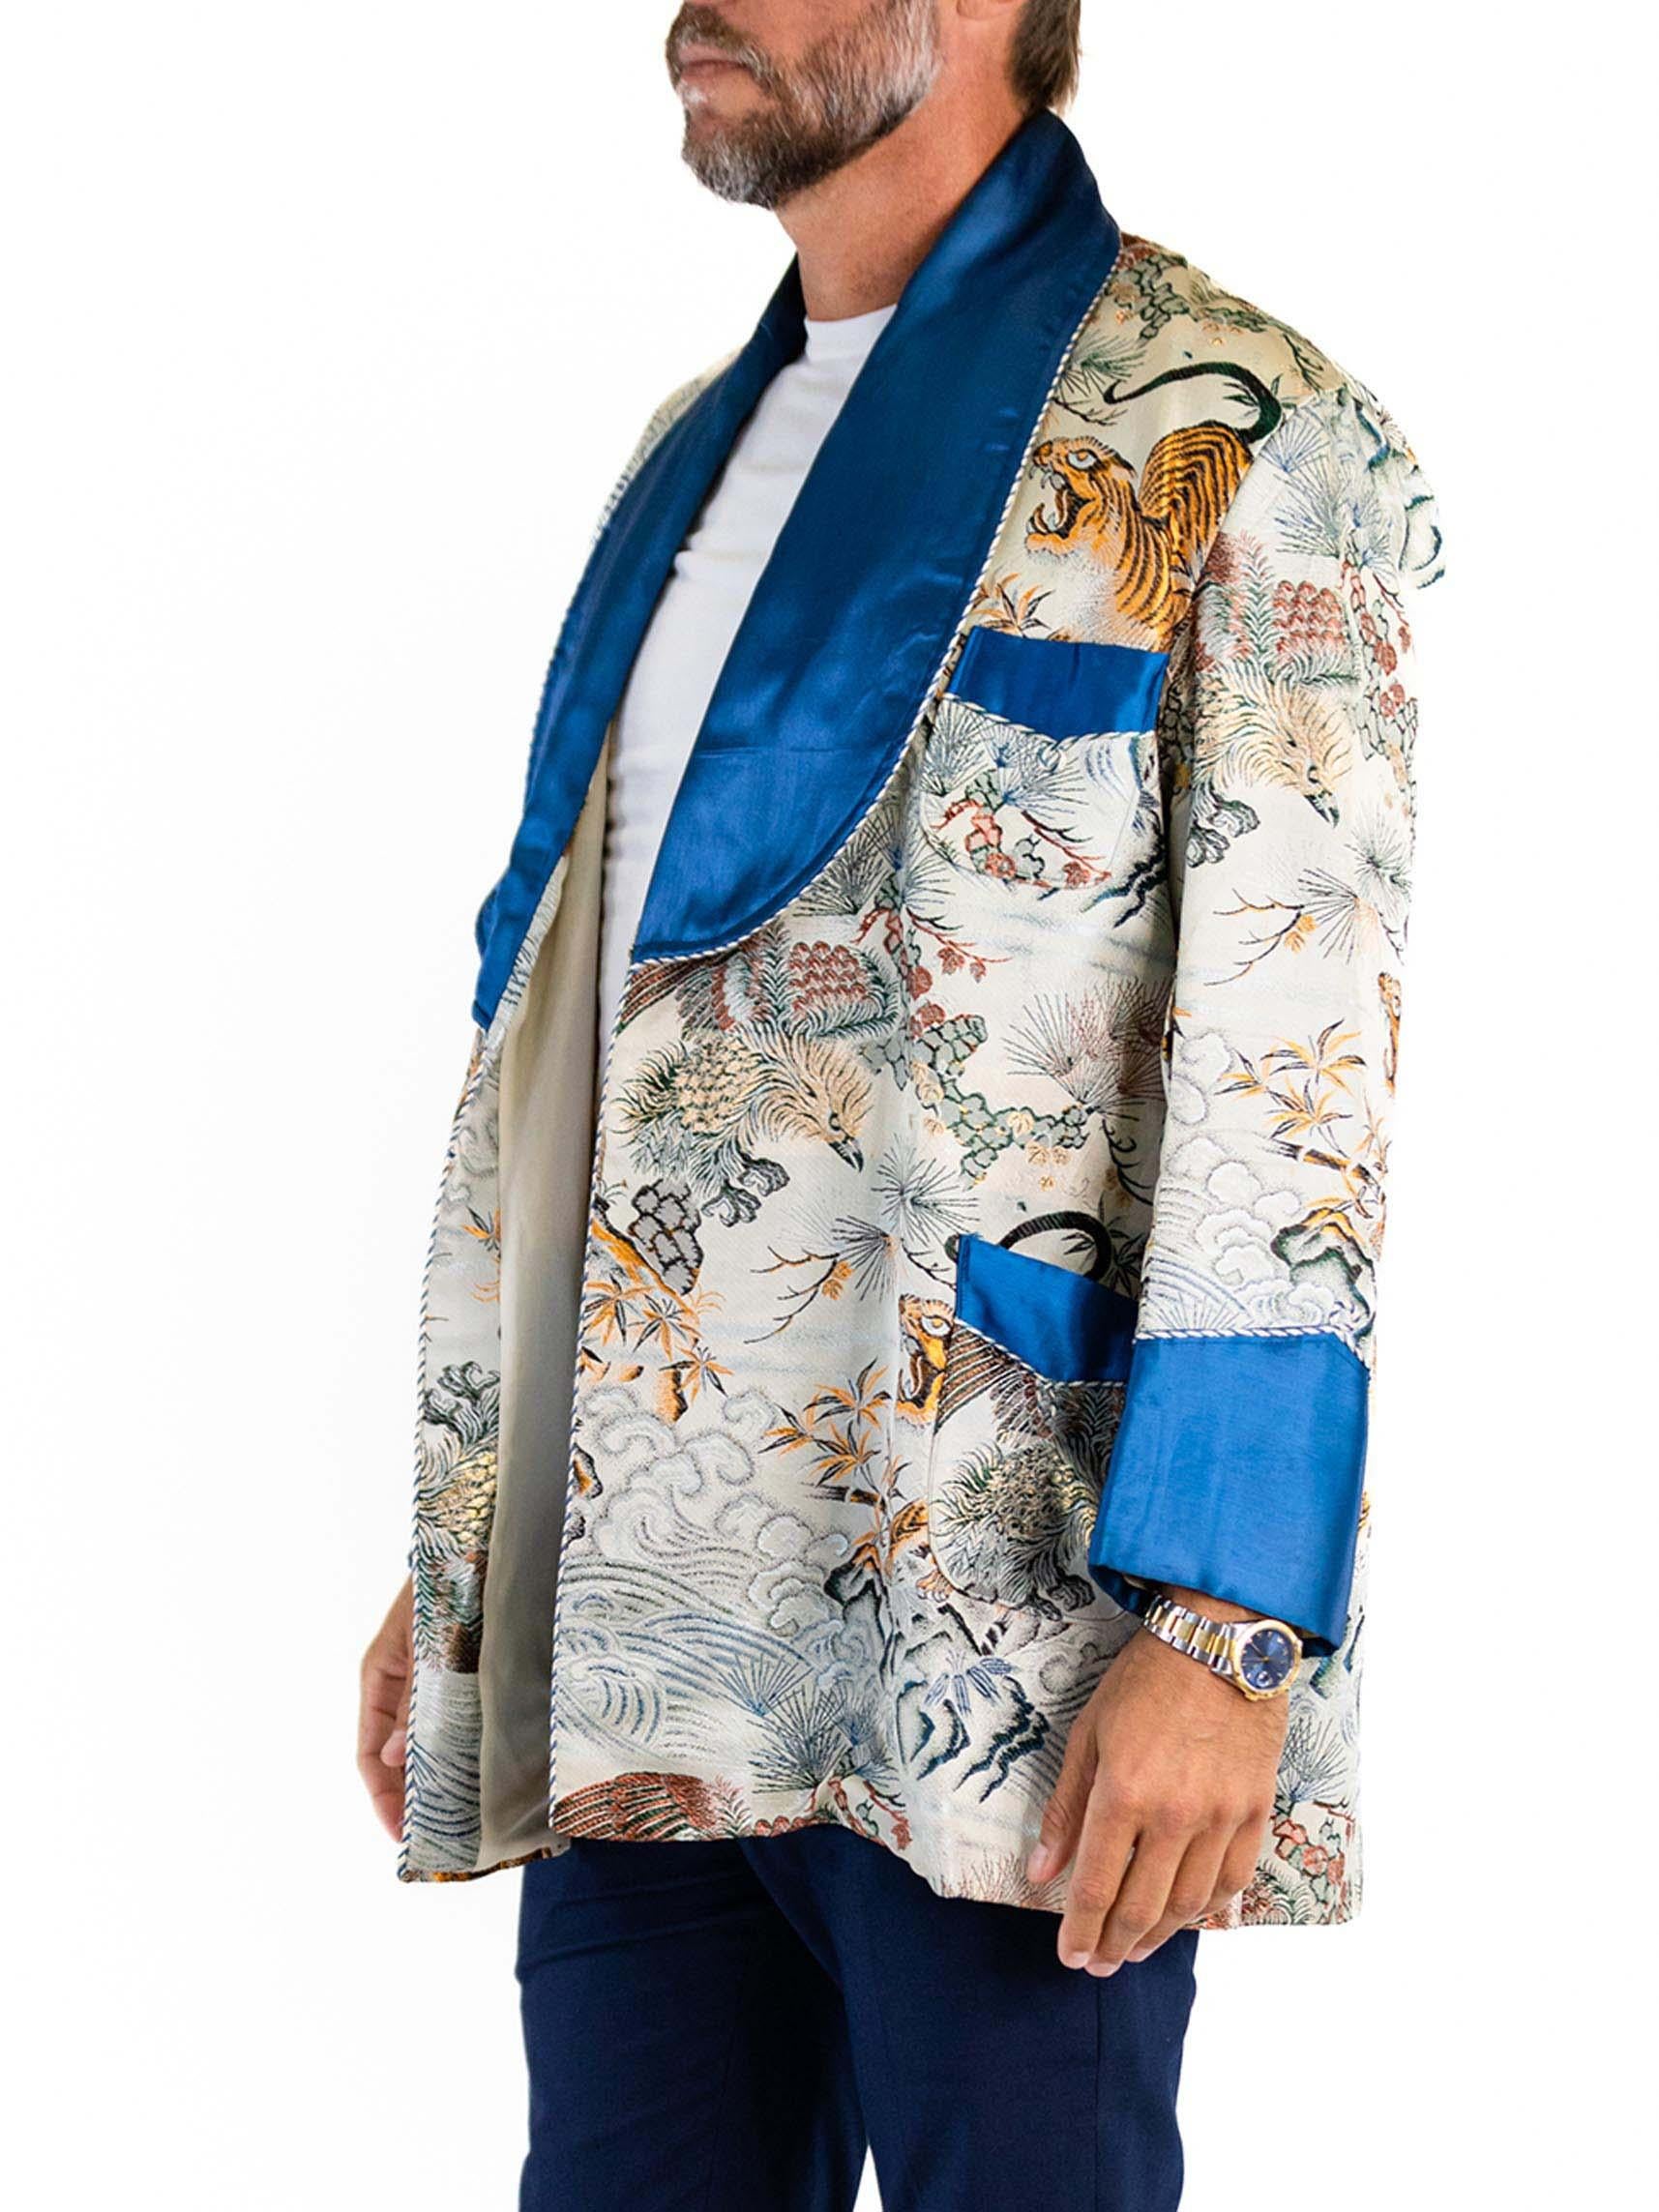 1950S Cream Rayon Jacquard Jacket With Tiger Embroidery And Blue Trim 1